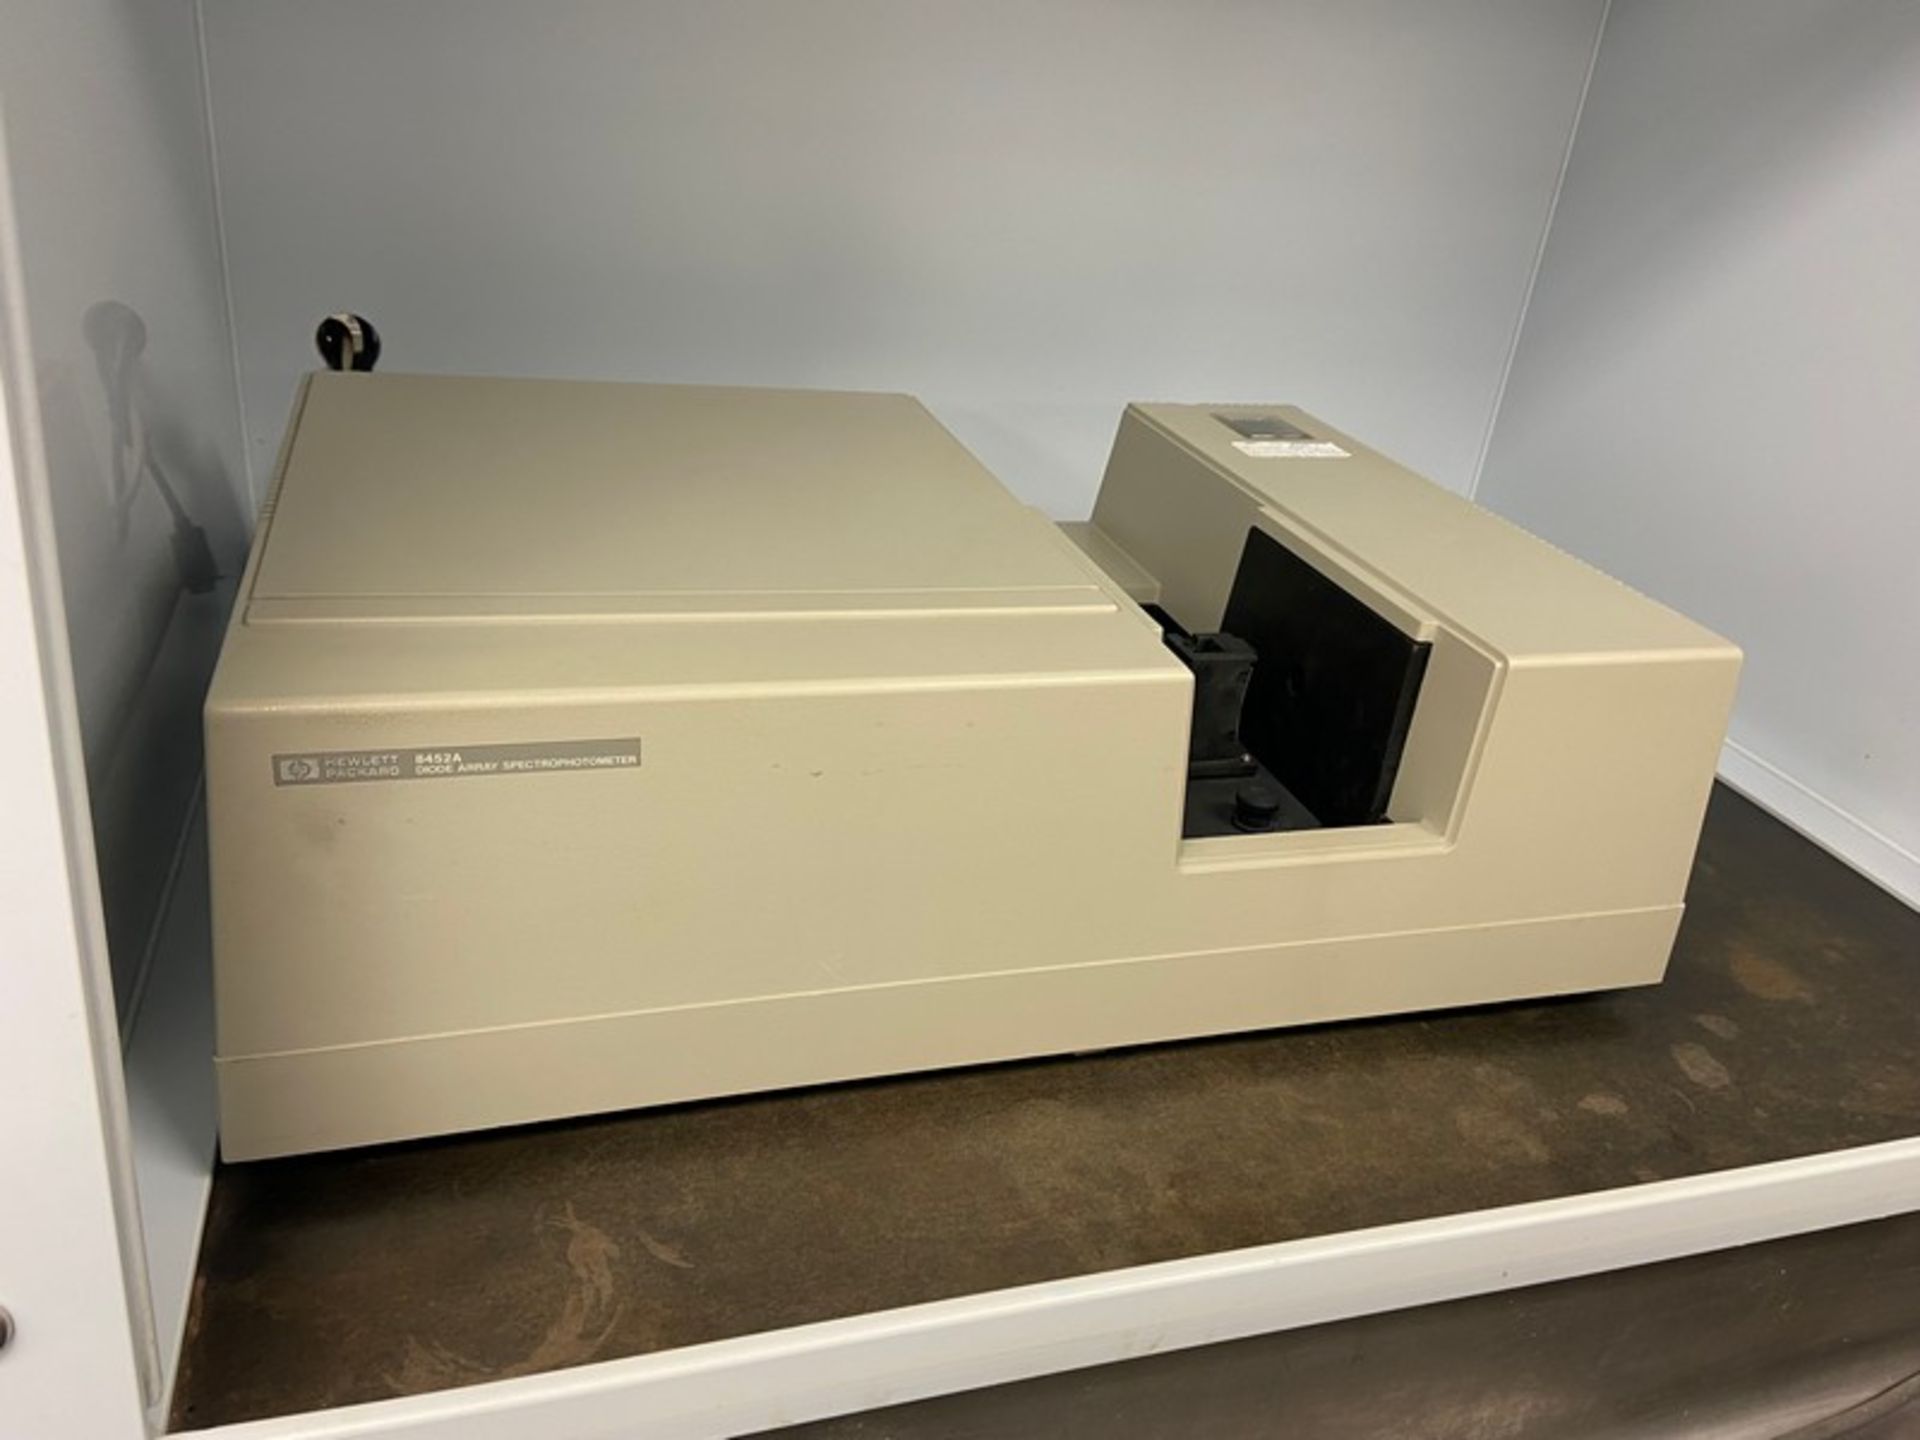 Hewlett Packard Diode Array Spectrophotometer, M/N 8452A (LOCATED IN MIDDLETOWN, N.Y.)-FOR PACKAGING - Image 2 of 3